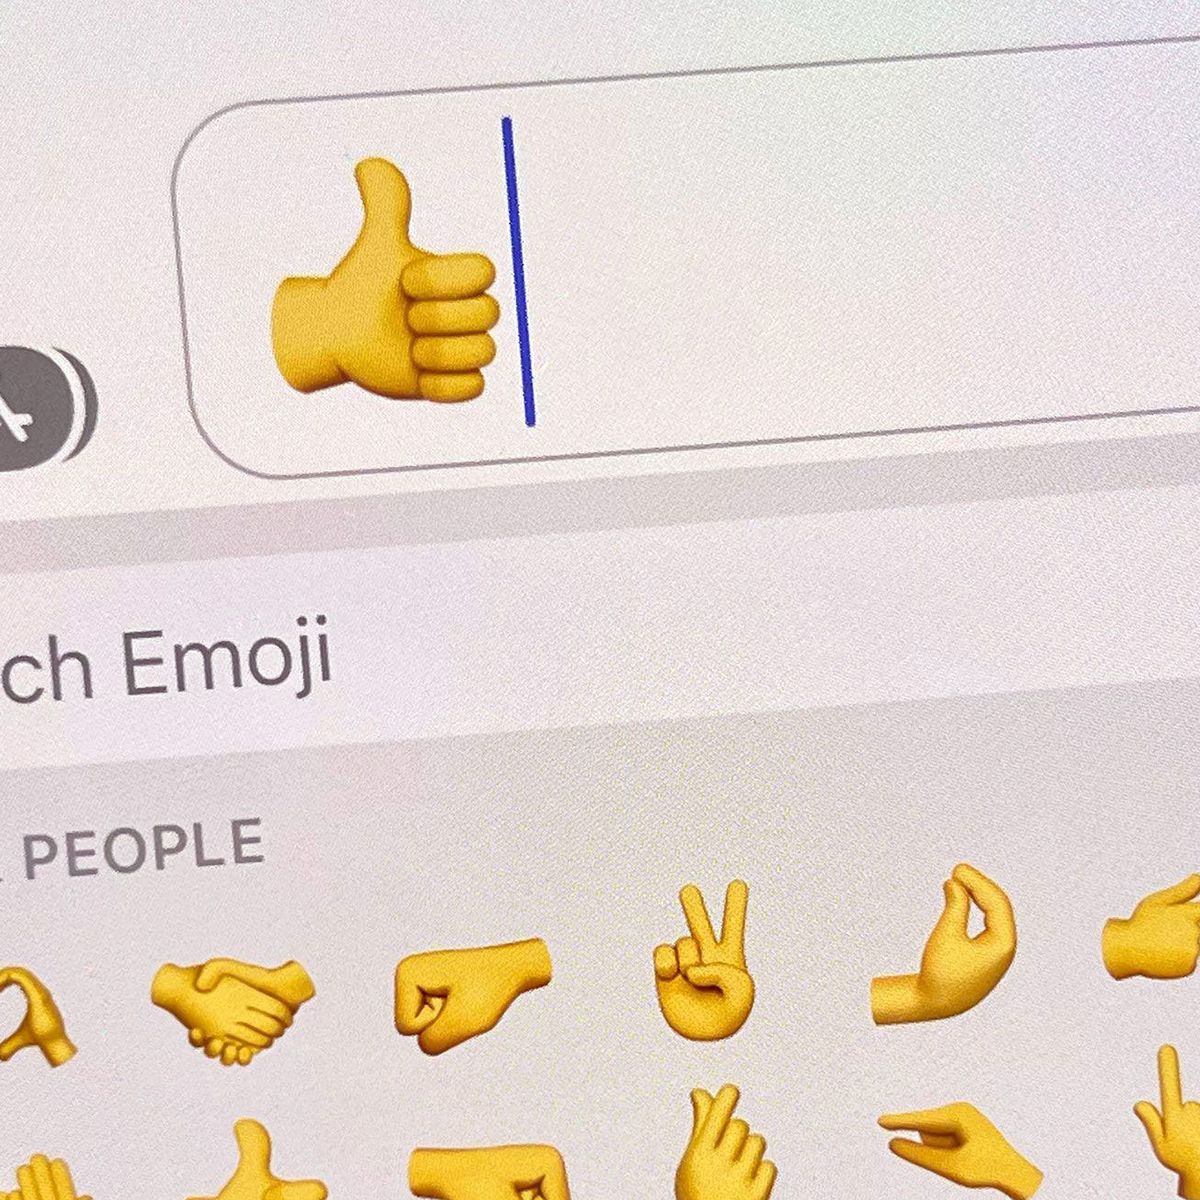 Why using 'thumbs up' emoji could be a legally binding contract